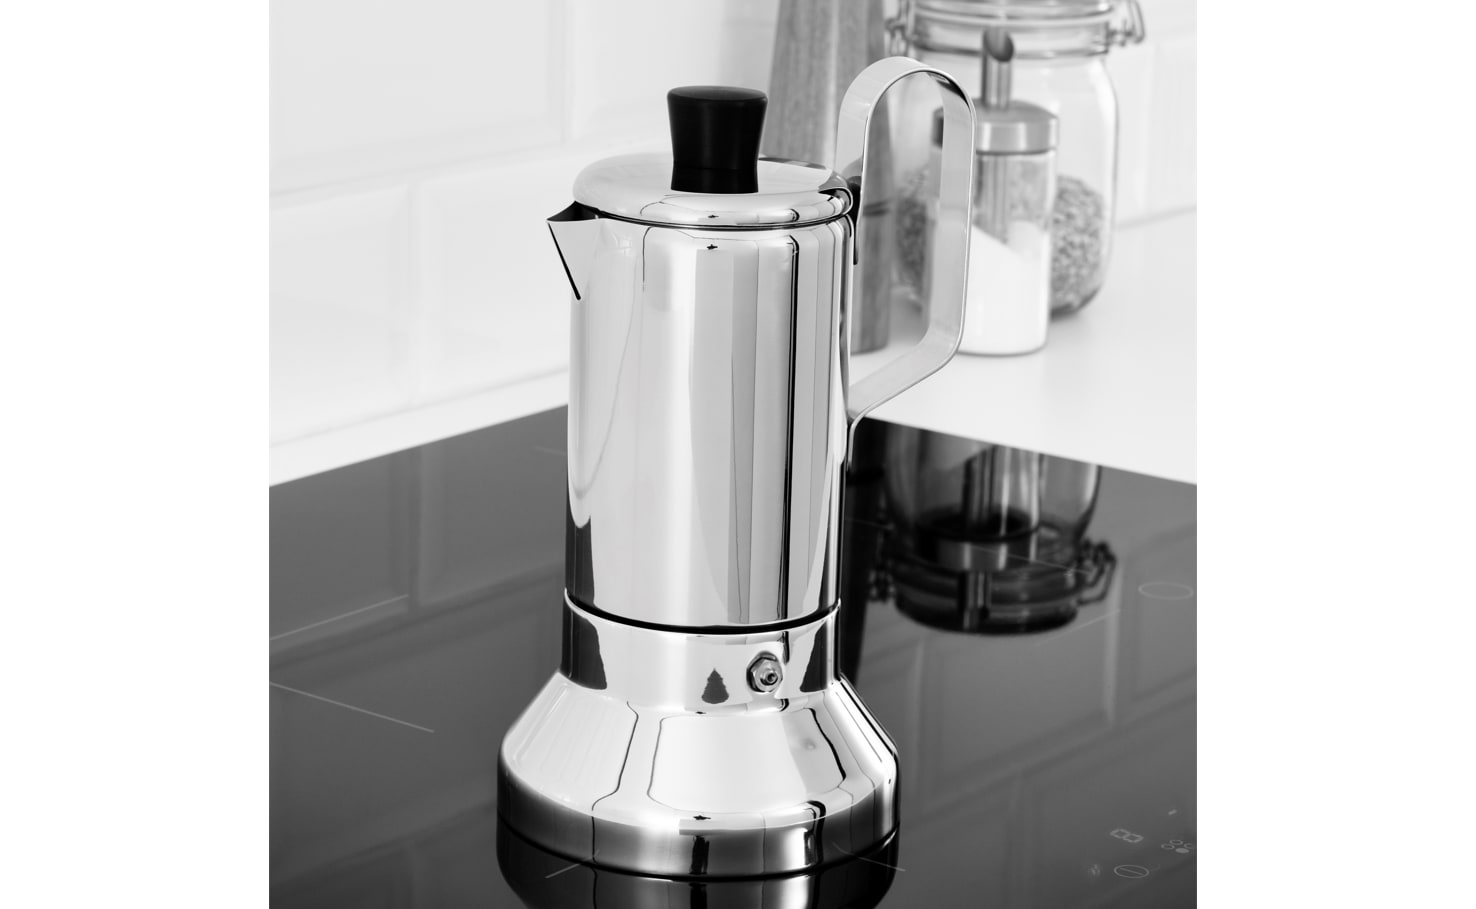 Ikea recalls espresso maker due to risk of it 'bursting during use'